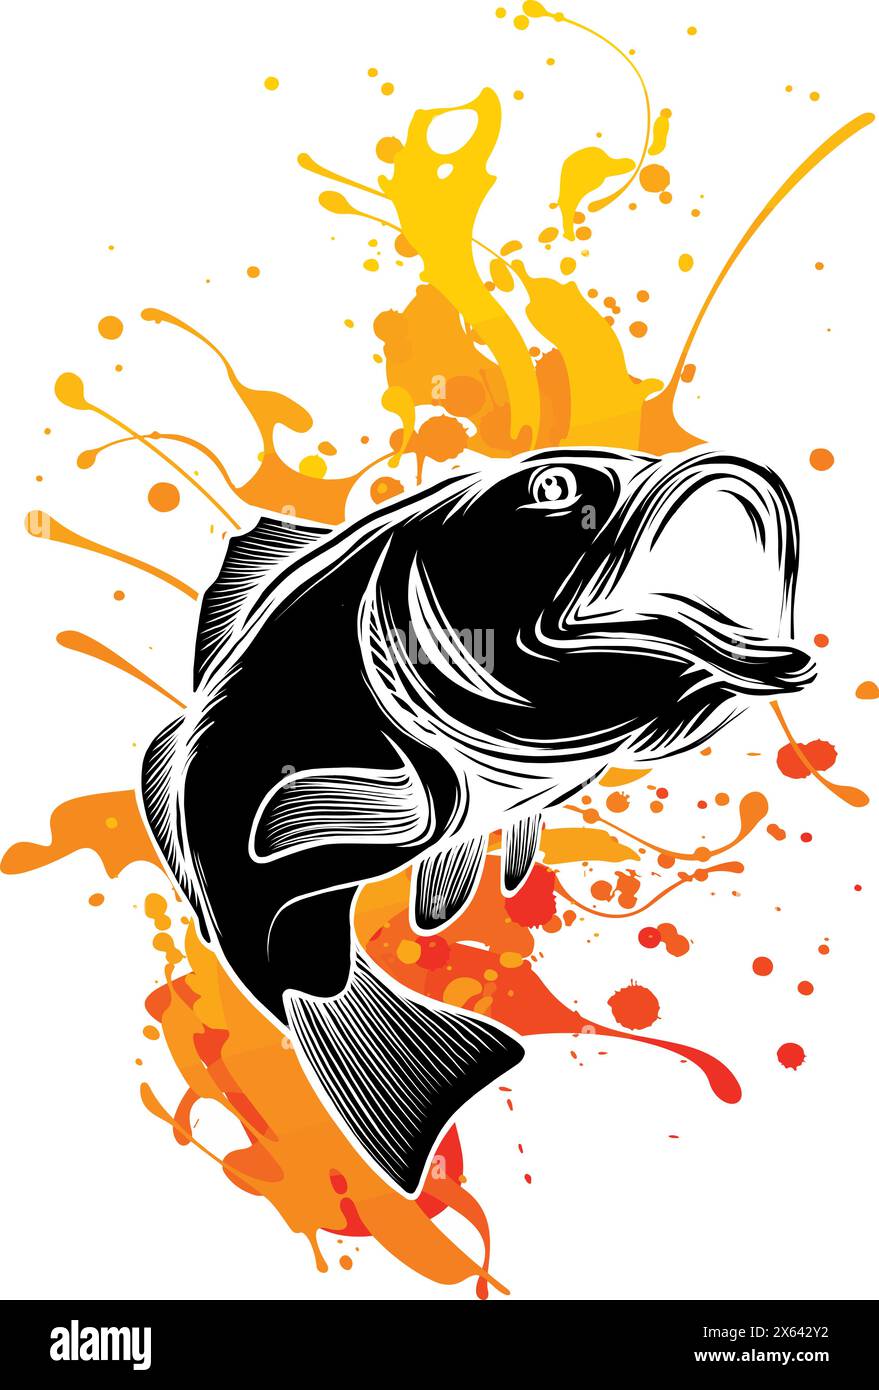 vector illustration of bass fish on white background. digital draw Stock Vector